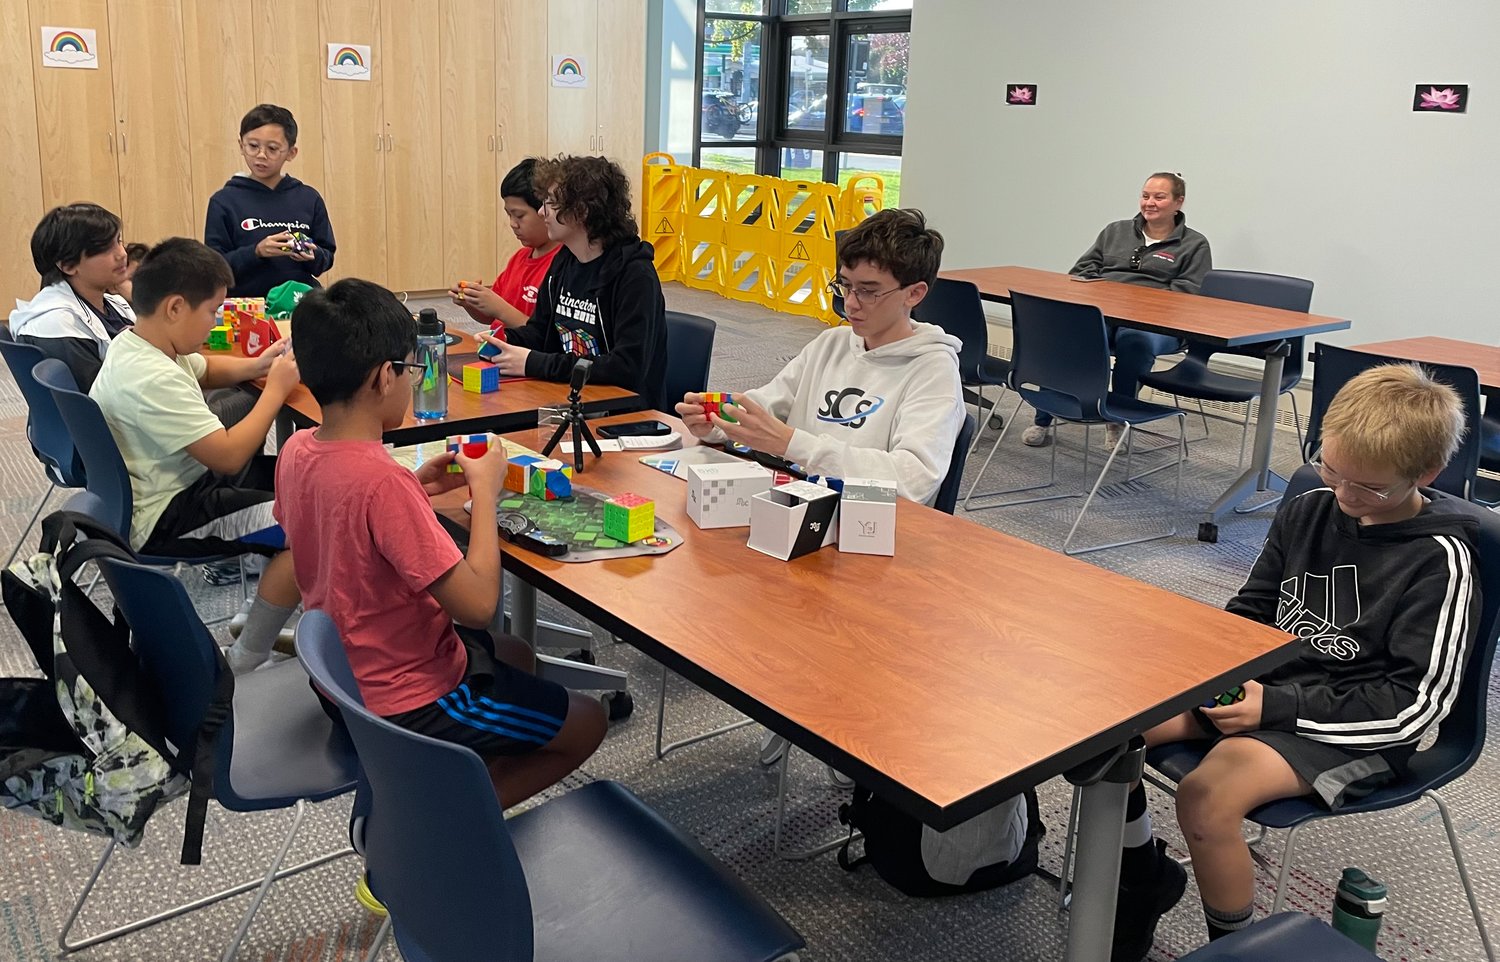 As Angelo got more into speedcubing, Faye thought that starting a club would be a cool idea. From there, two workshops were created to teach other kids how to speed cube.